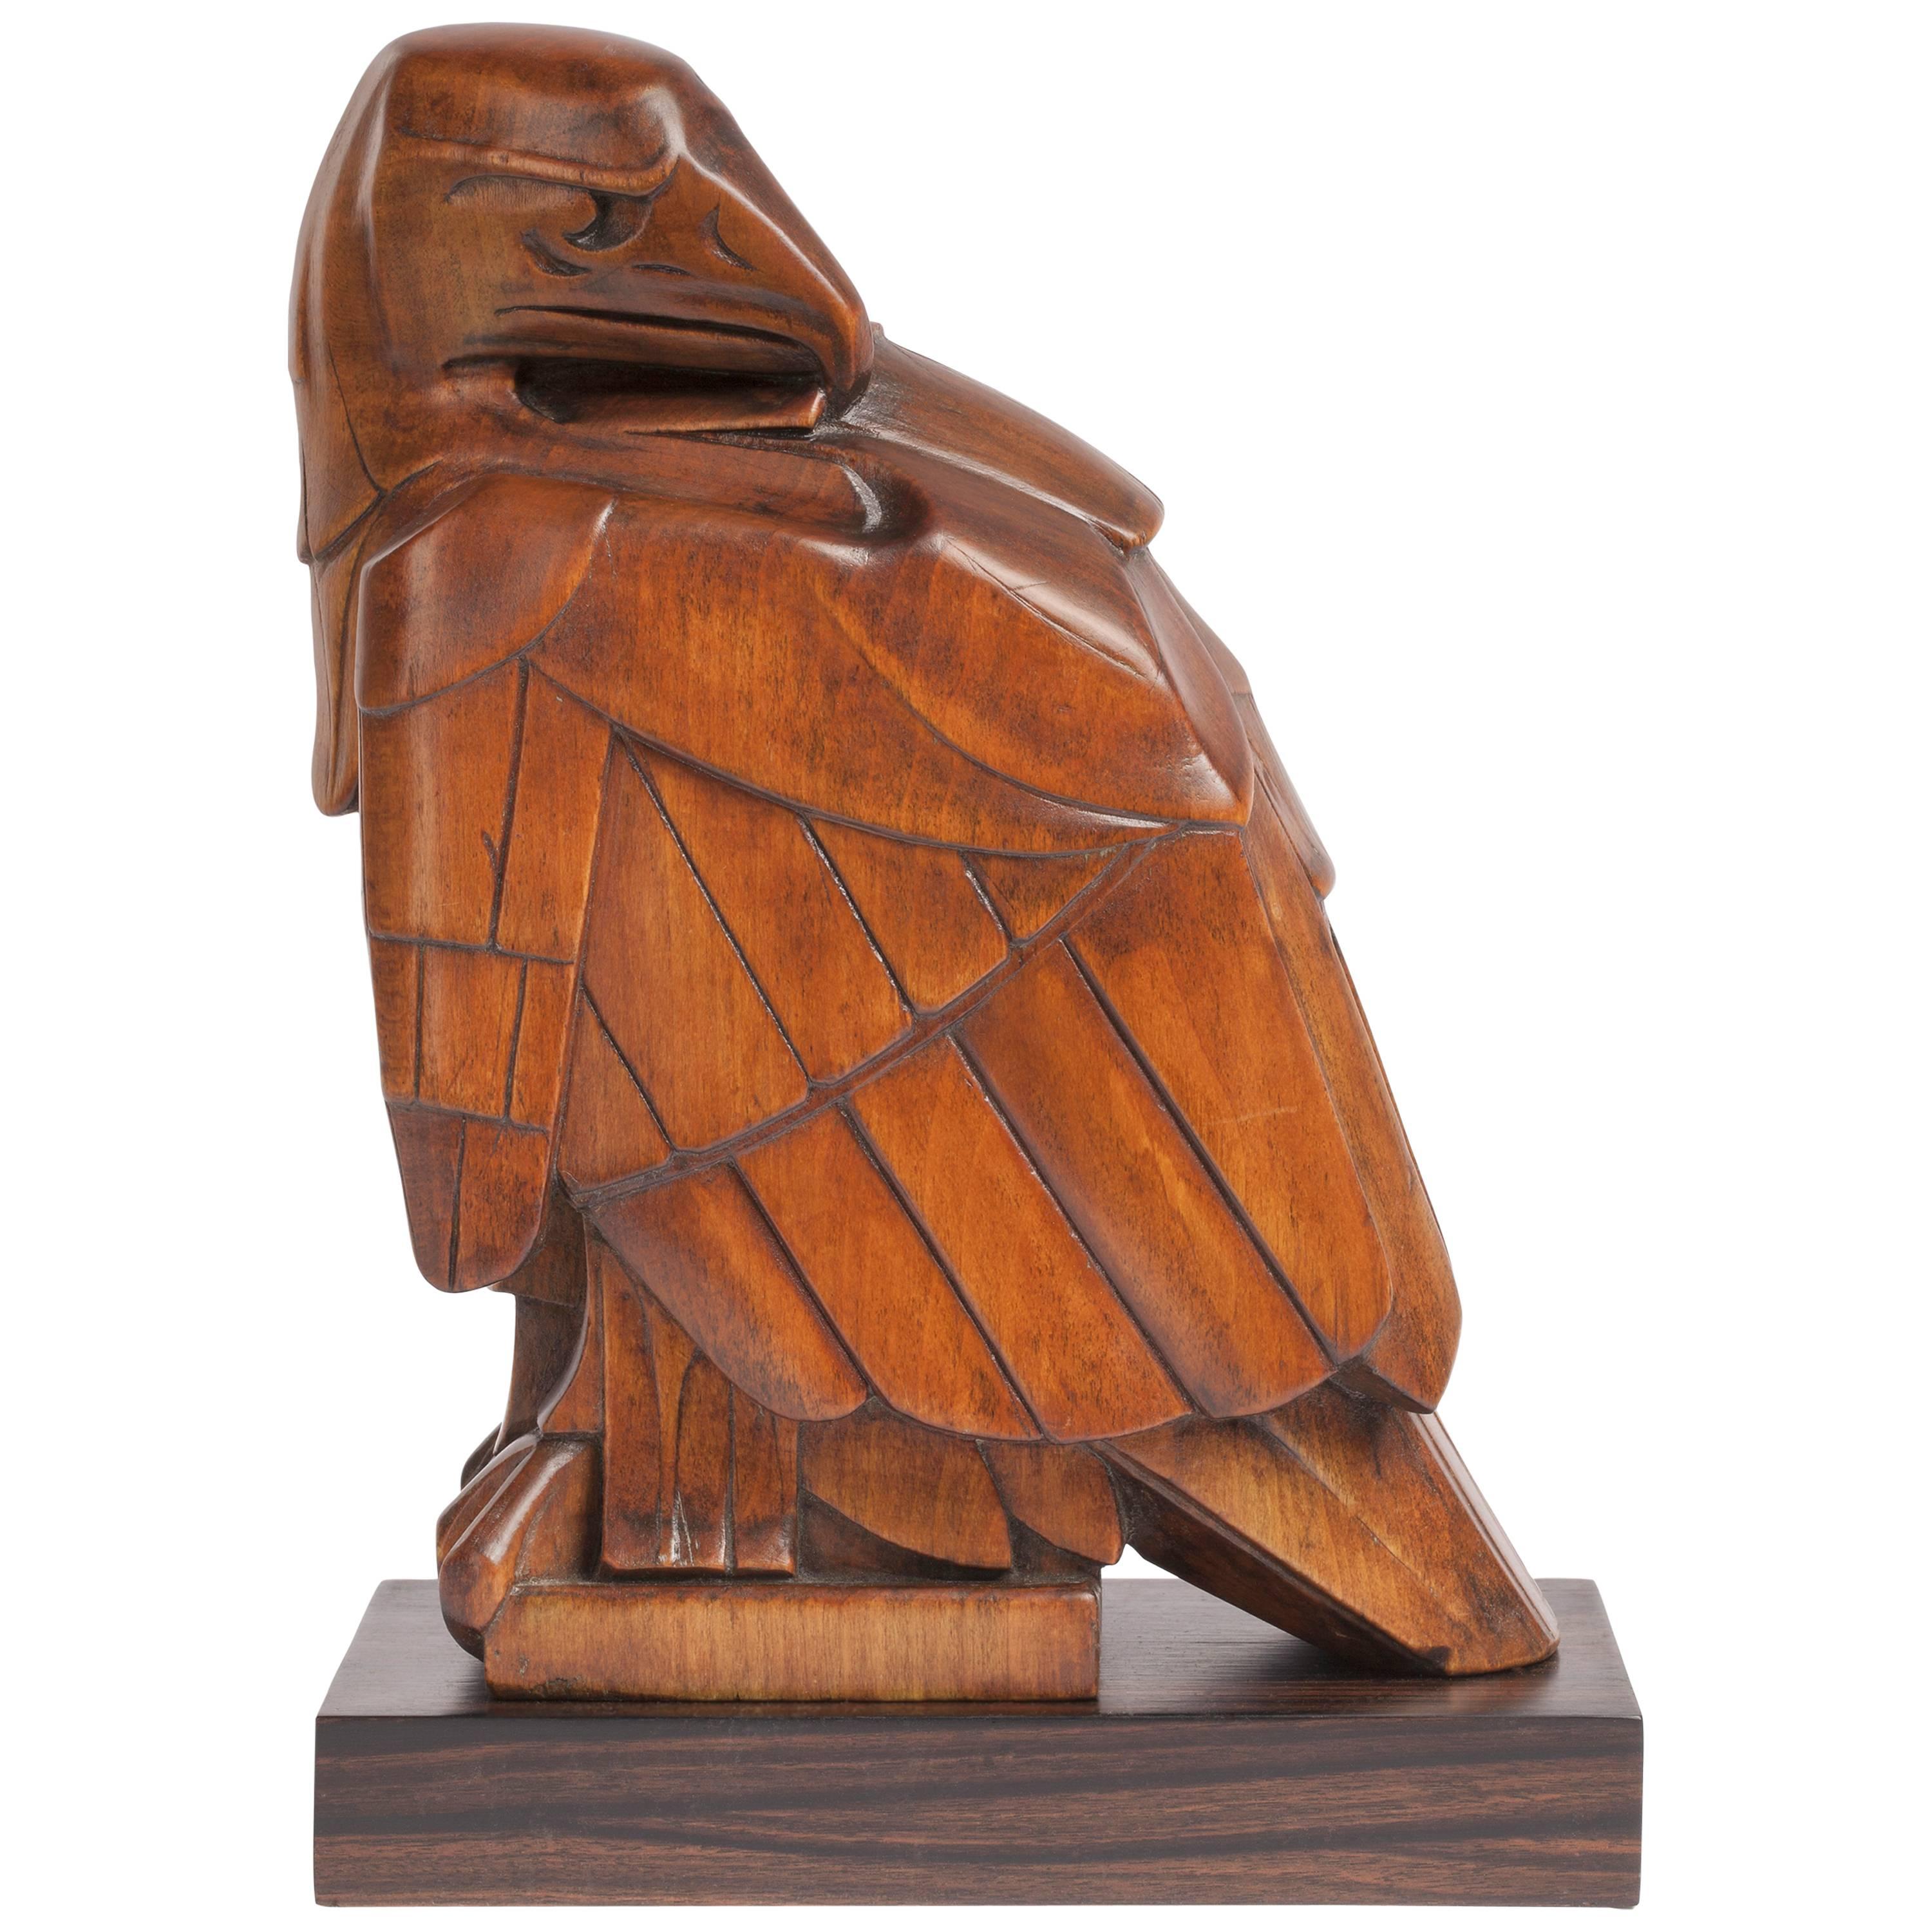 Limewood Sculpture of an Eagle by Jan Altorf, 1915